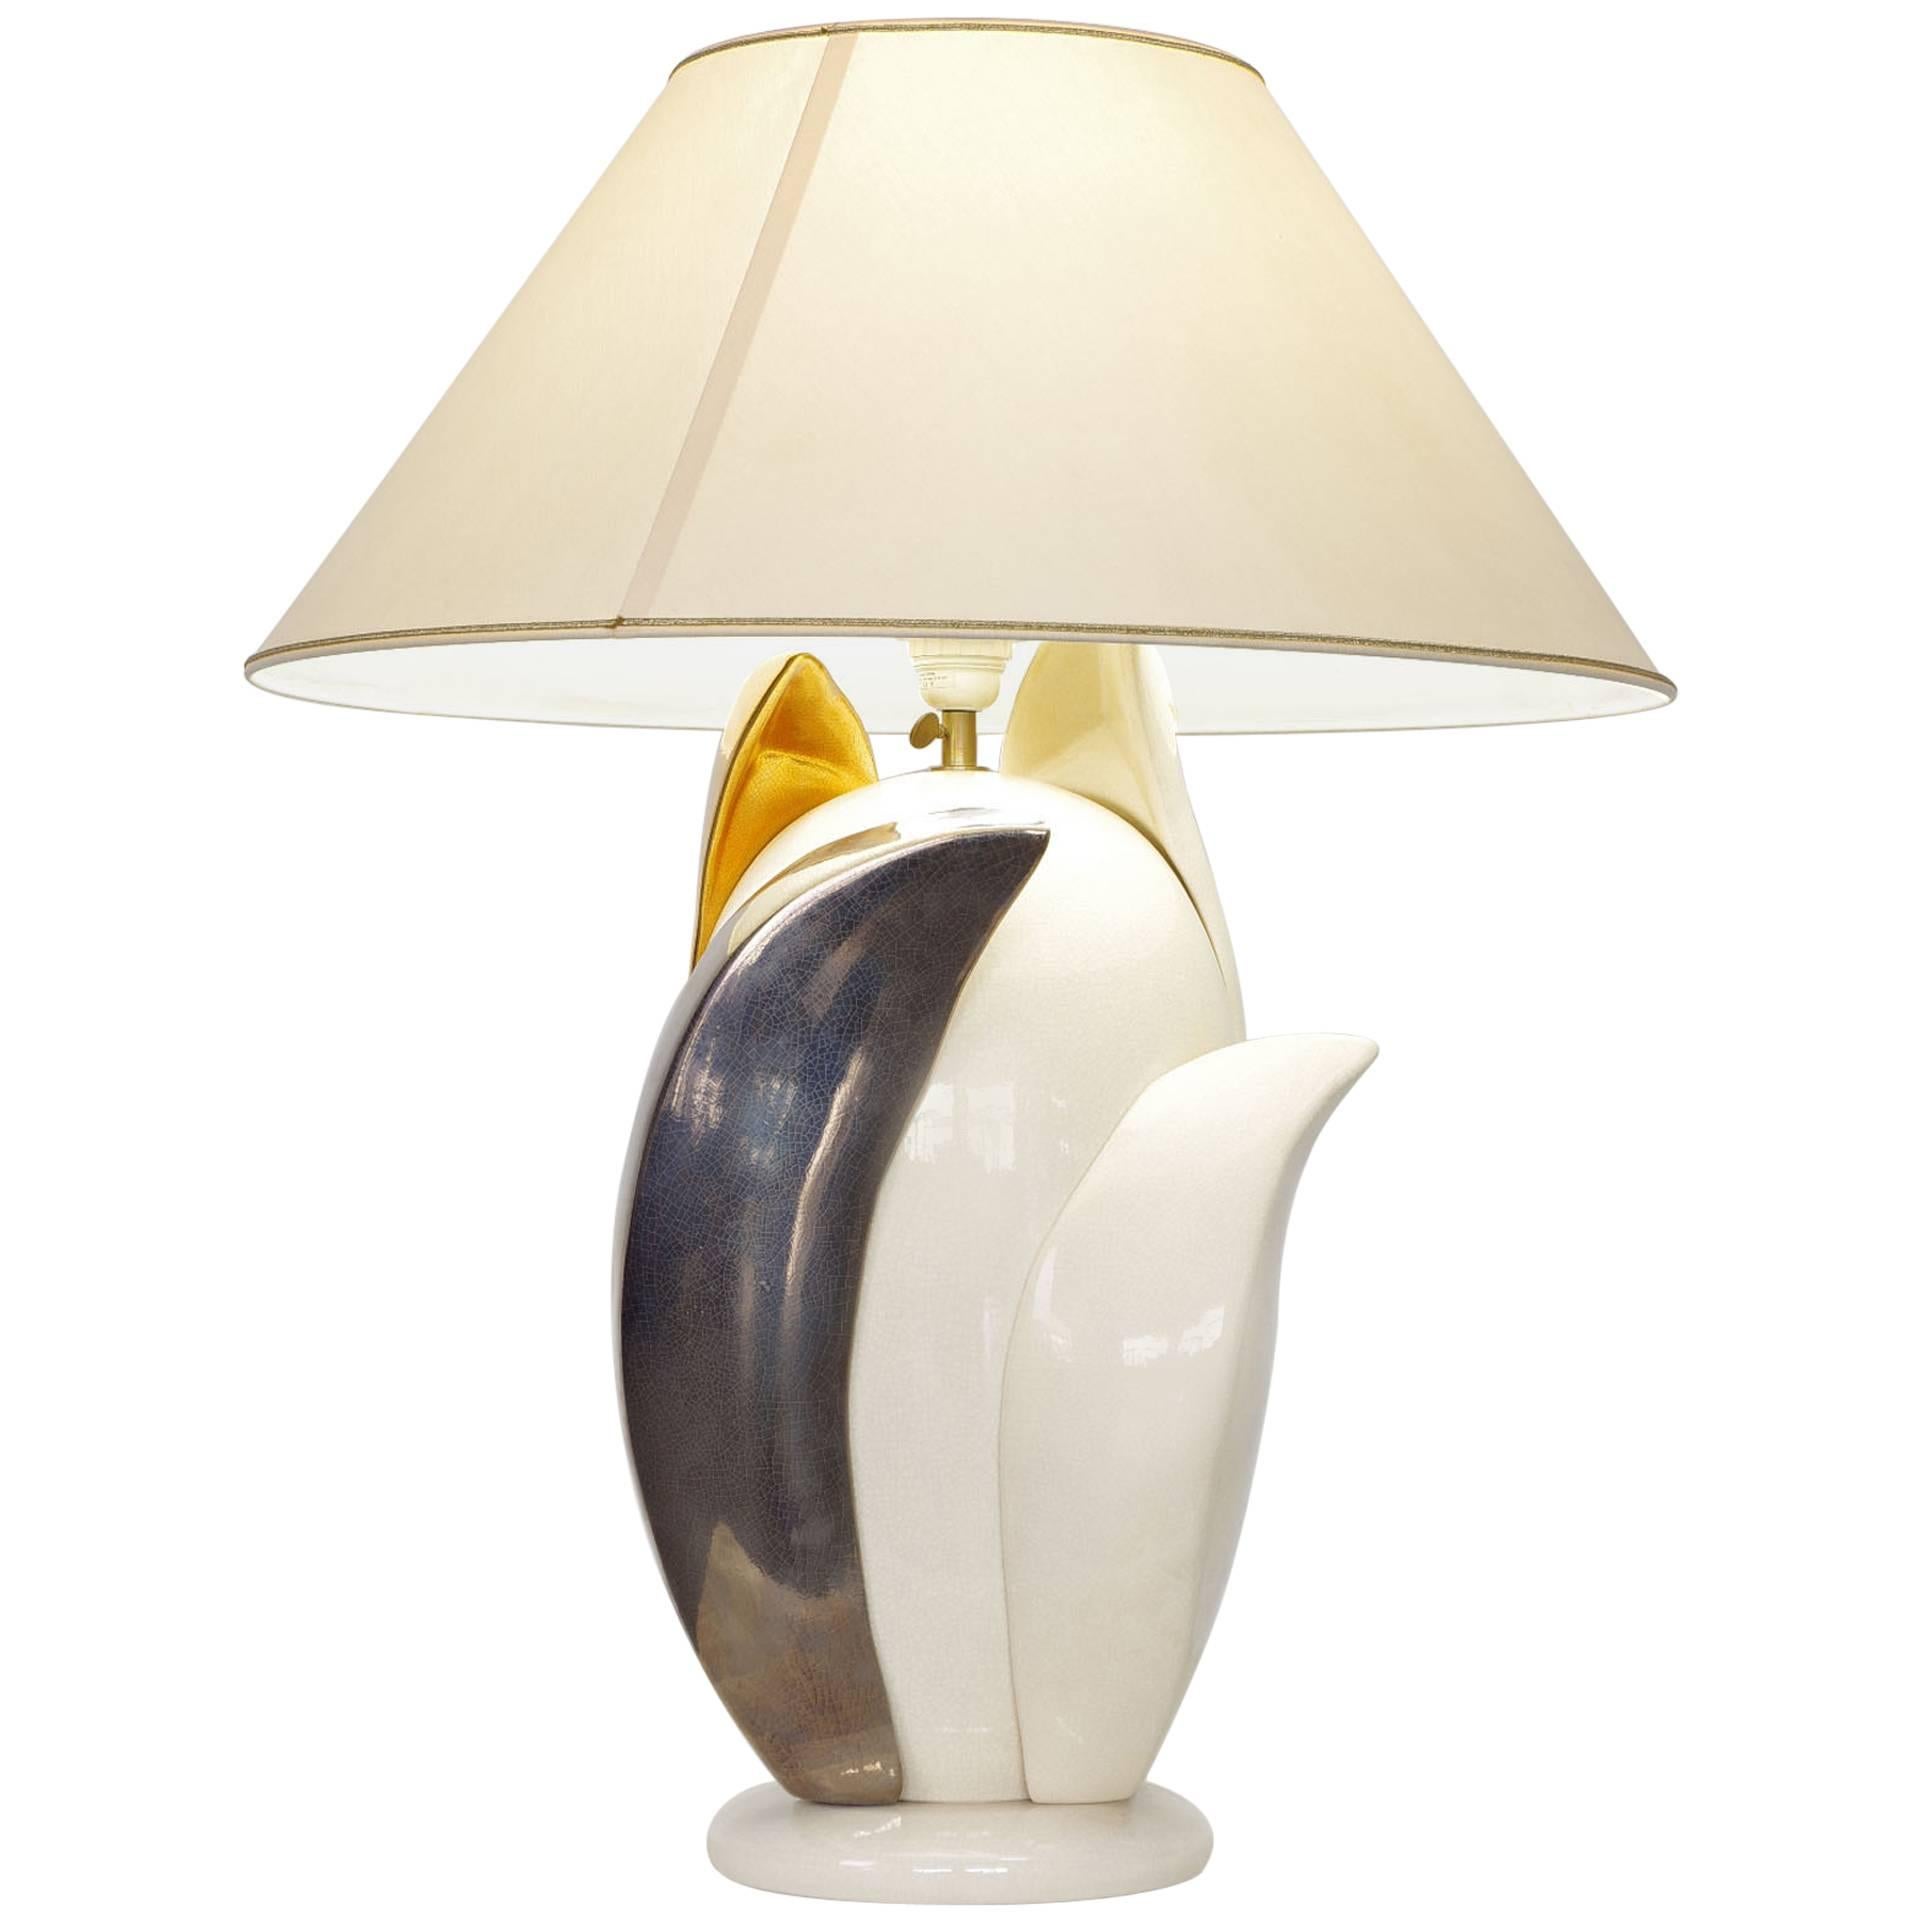 Very Rare Ceramic Table Lamp by Francois Chatain For Sale